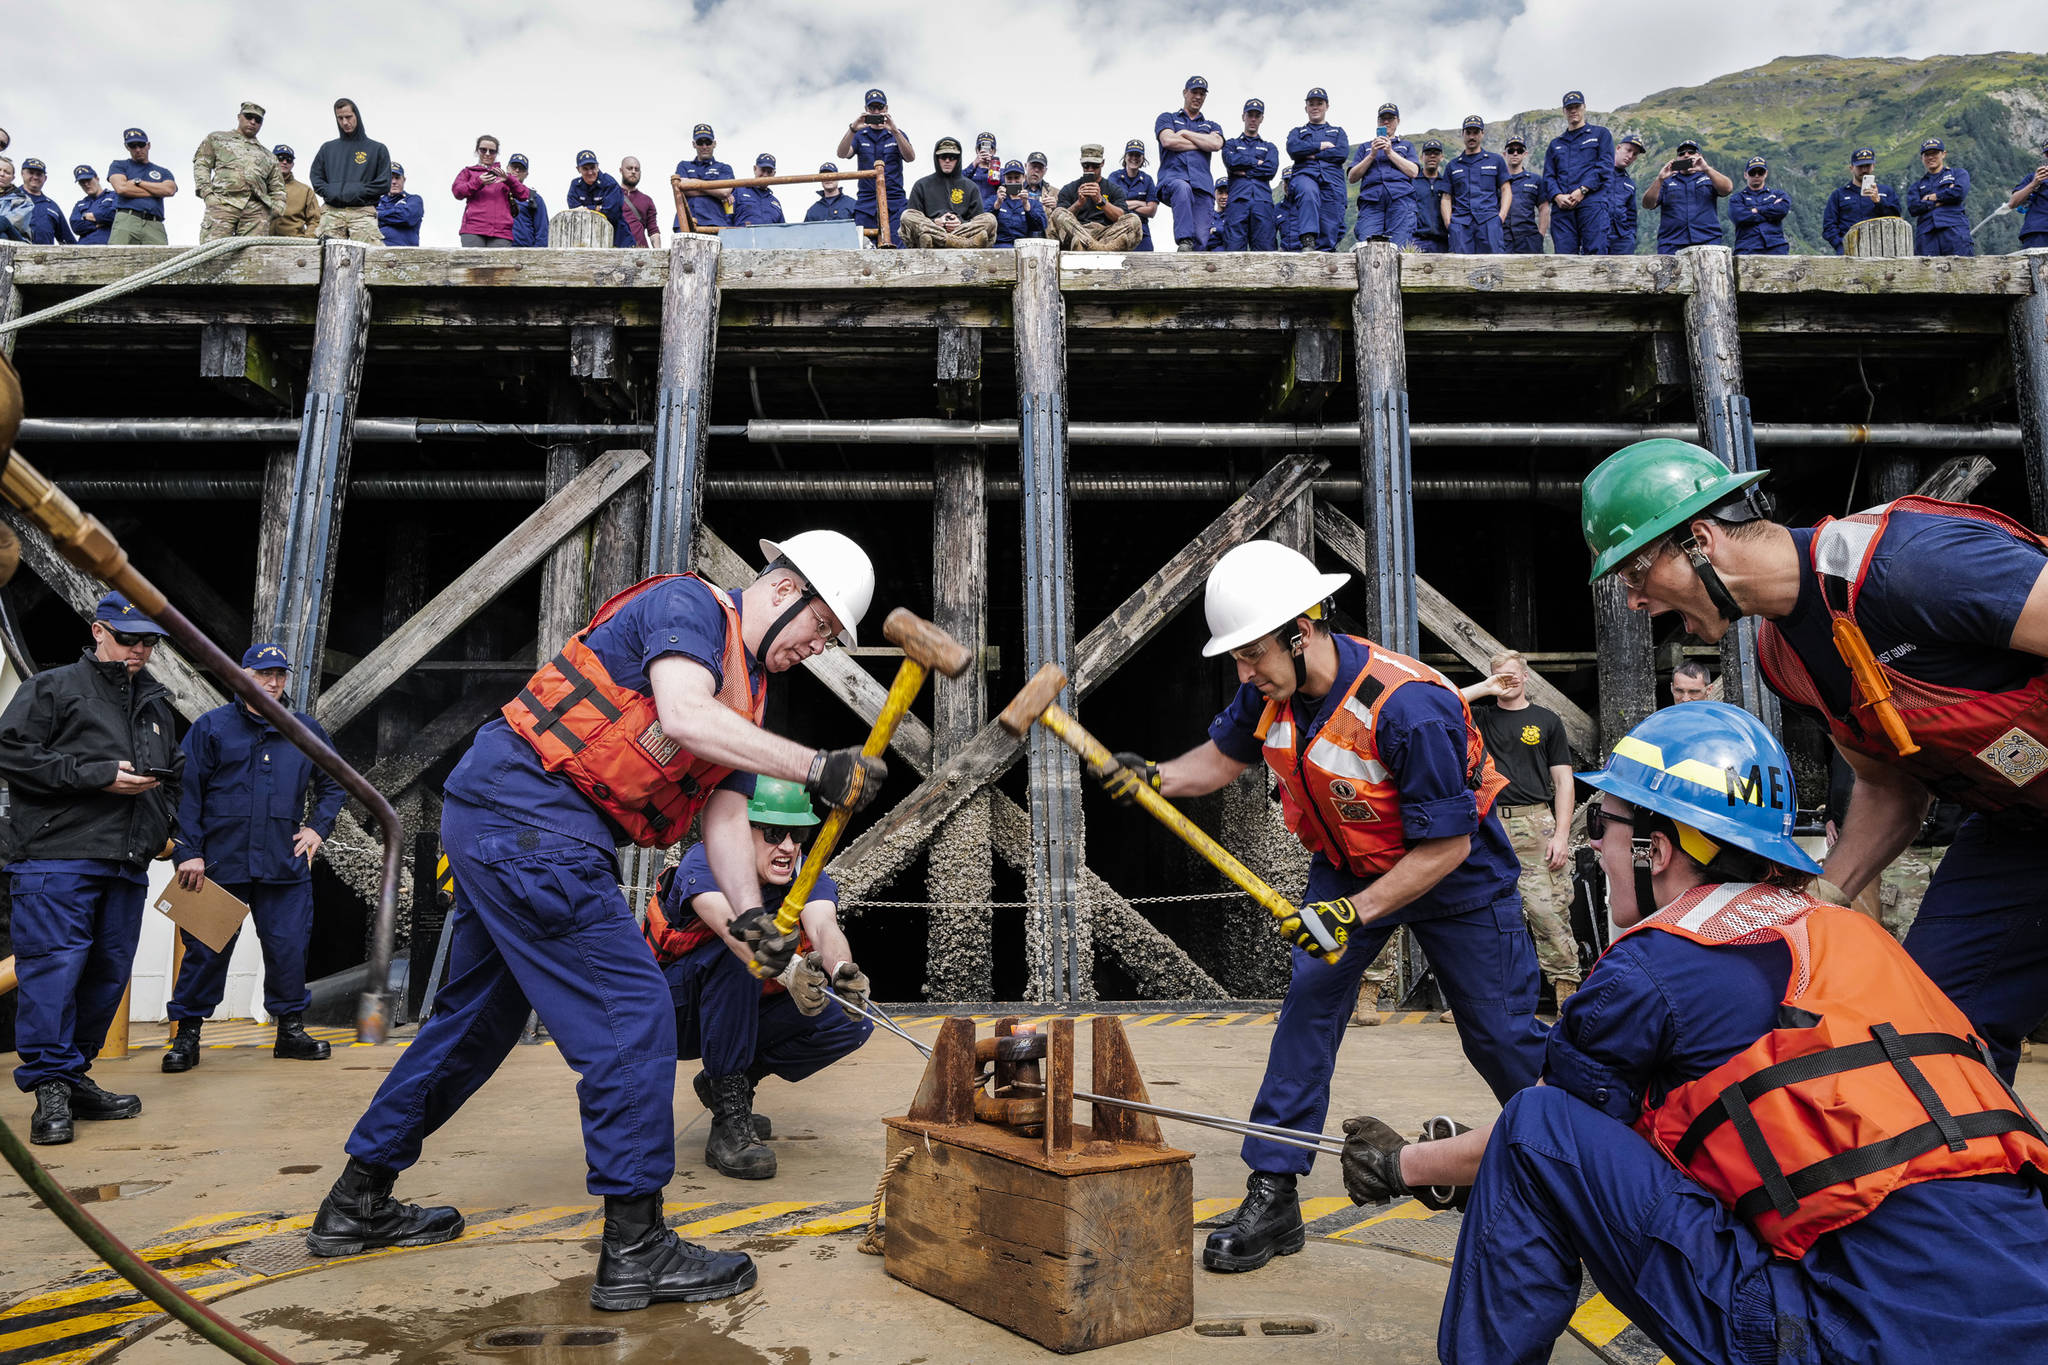 Members of the U.S. Coast Guard Cutter Kukui participate in the heat and beat contest during the annual Buoy Tender Olympics at Station Juneau on Wednesday, Aug. 21, 2019. Lt. Cdr. Ray Reichl, left, swings a sledge hammer with Lt. Cyrus Unvala as teammates Ens. Joseph Snyder and Ens. Victoria Sparacino hold the shackle and Enx. Reid Wiegleb yells encouragement. (Michael Penn | Juneau Empire)